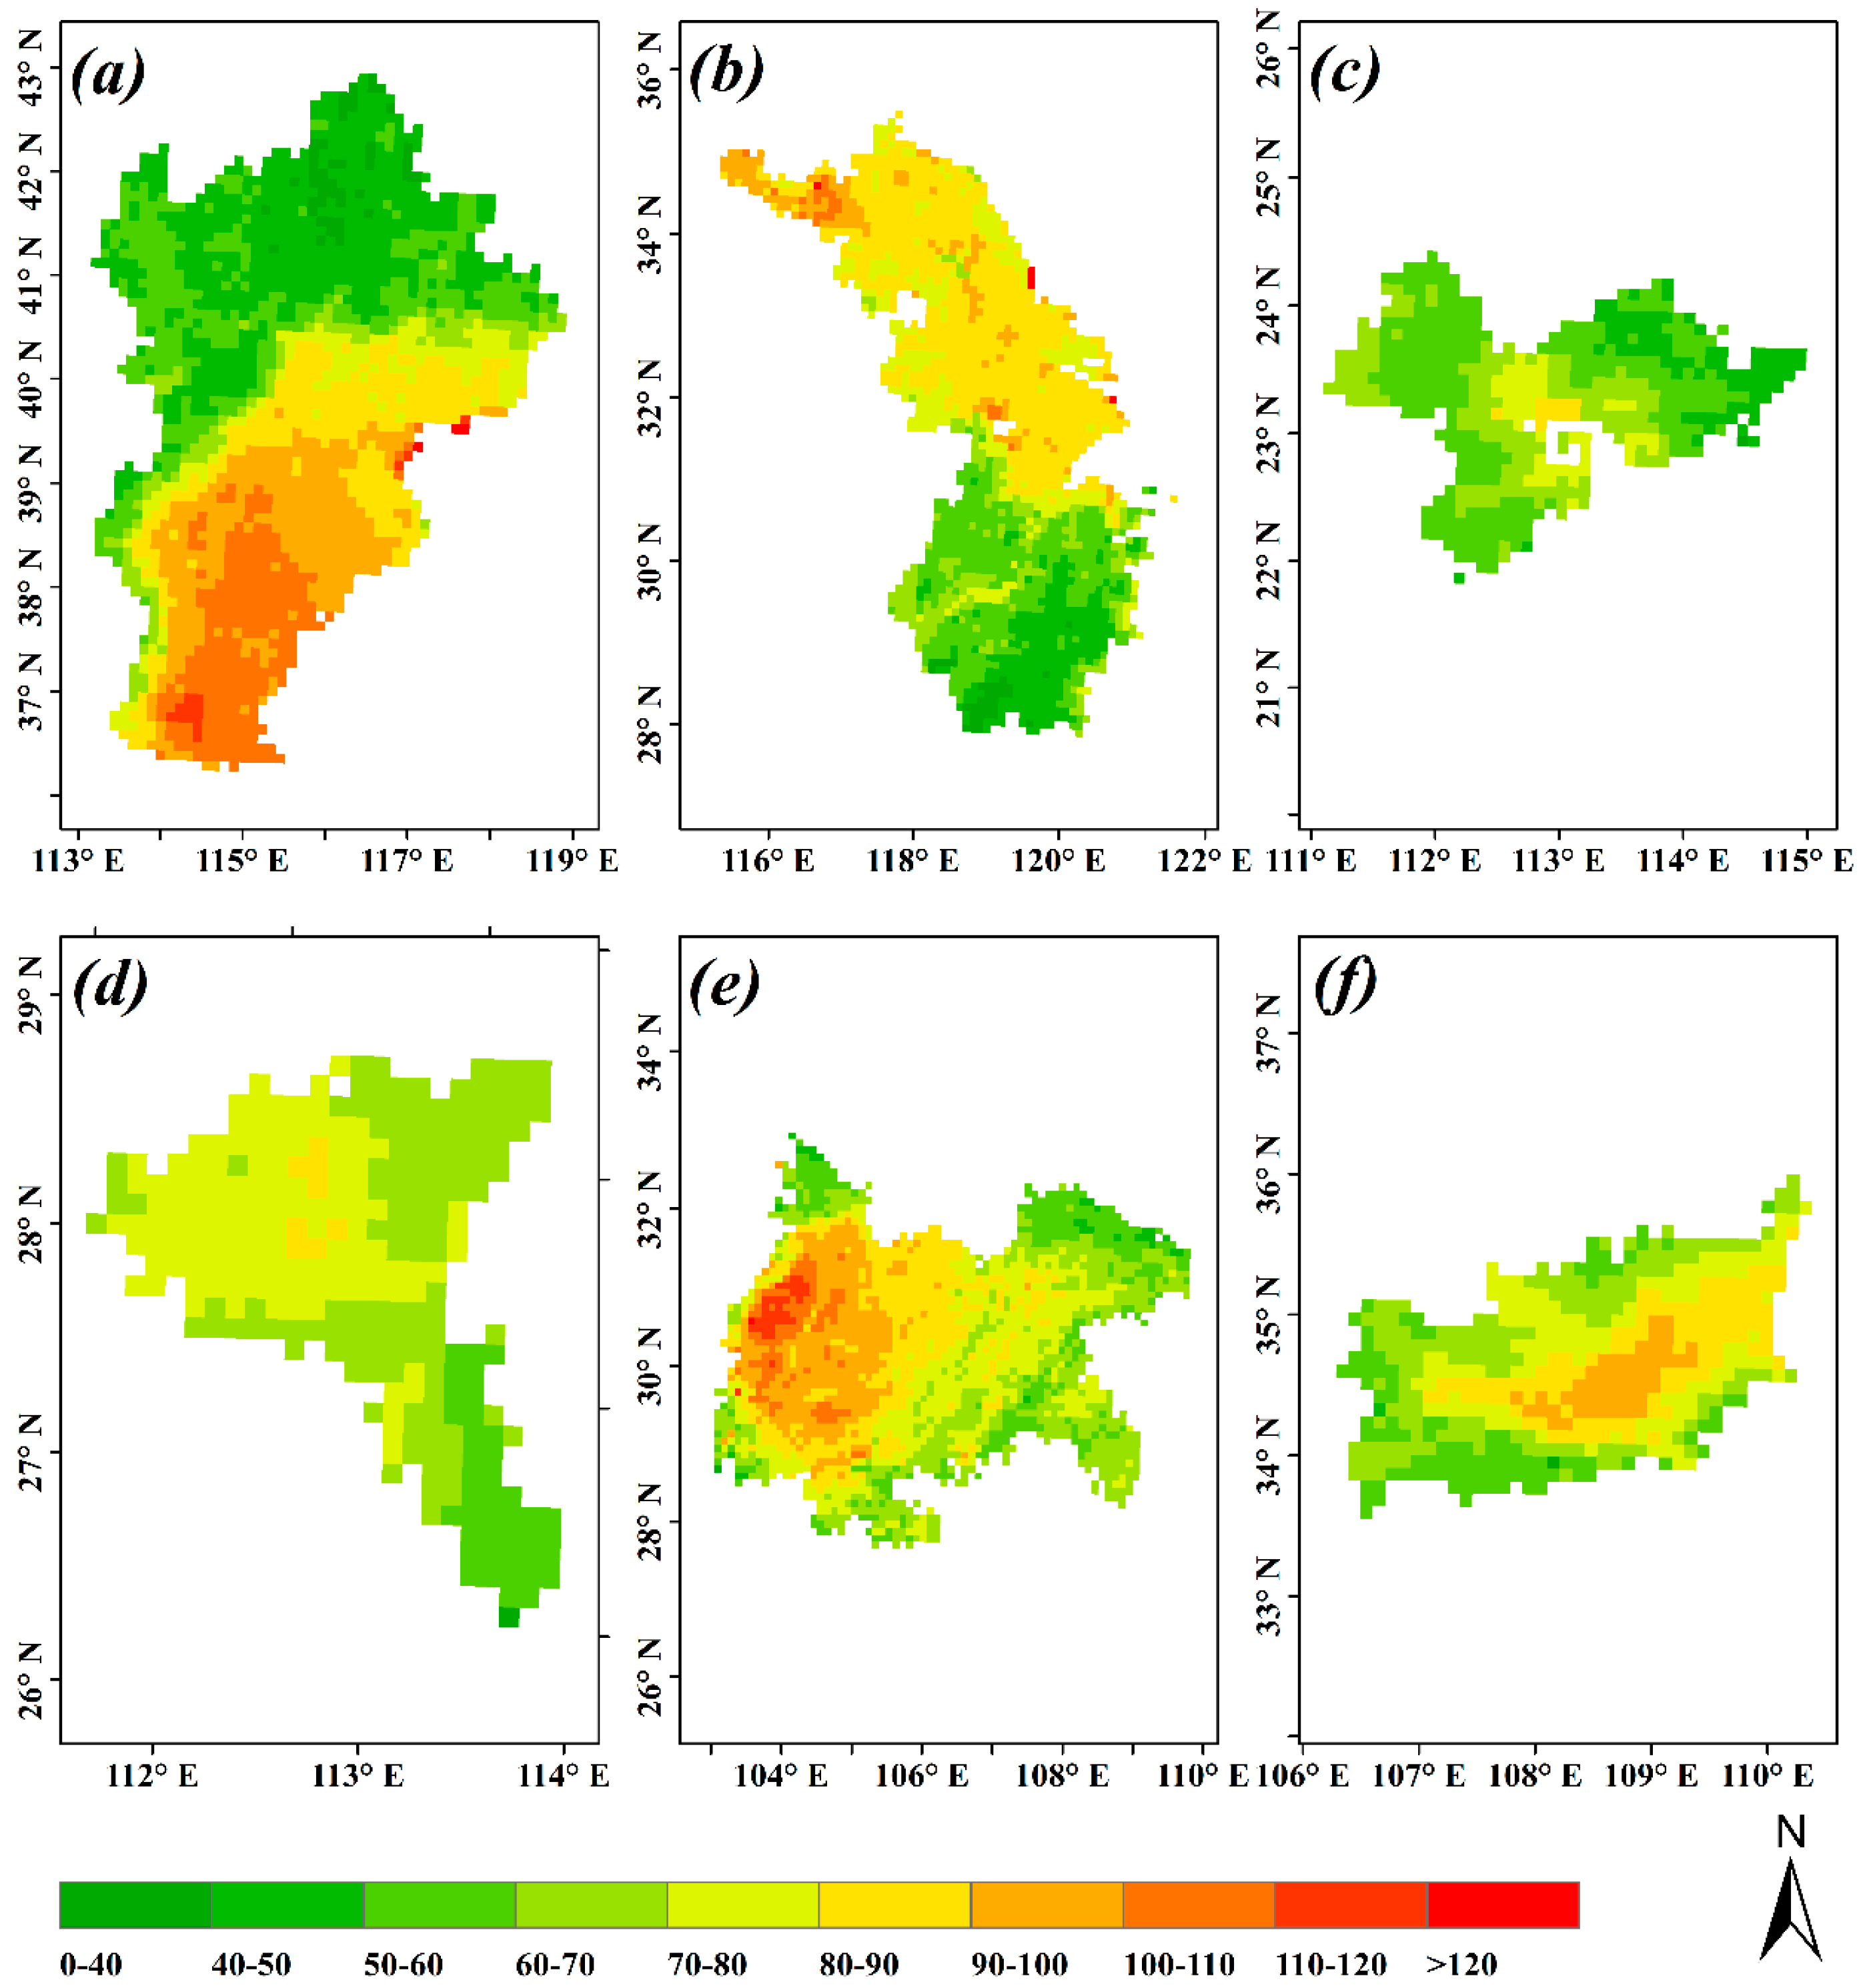 Remote Sensing | Free Full-Text | Scale- and Region-Dependence in  Landscape-PM2.5 Correlation: Implications for Urban Planning | HTML